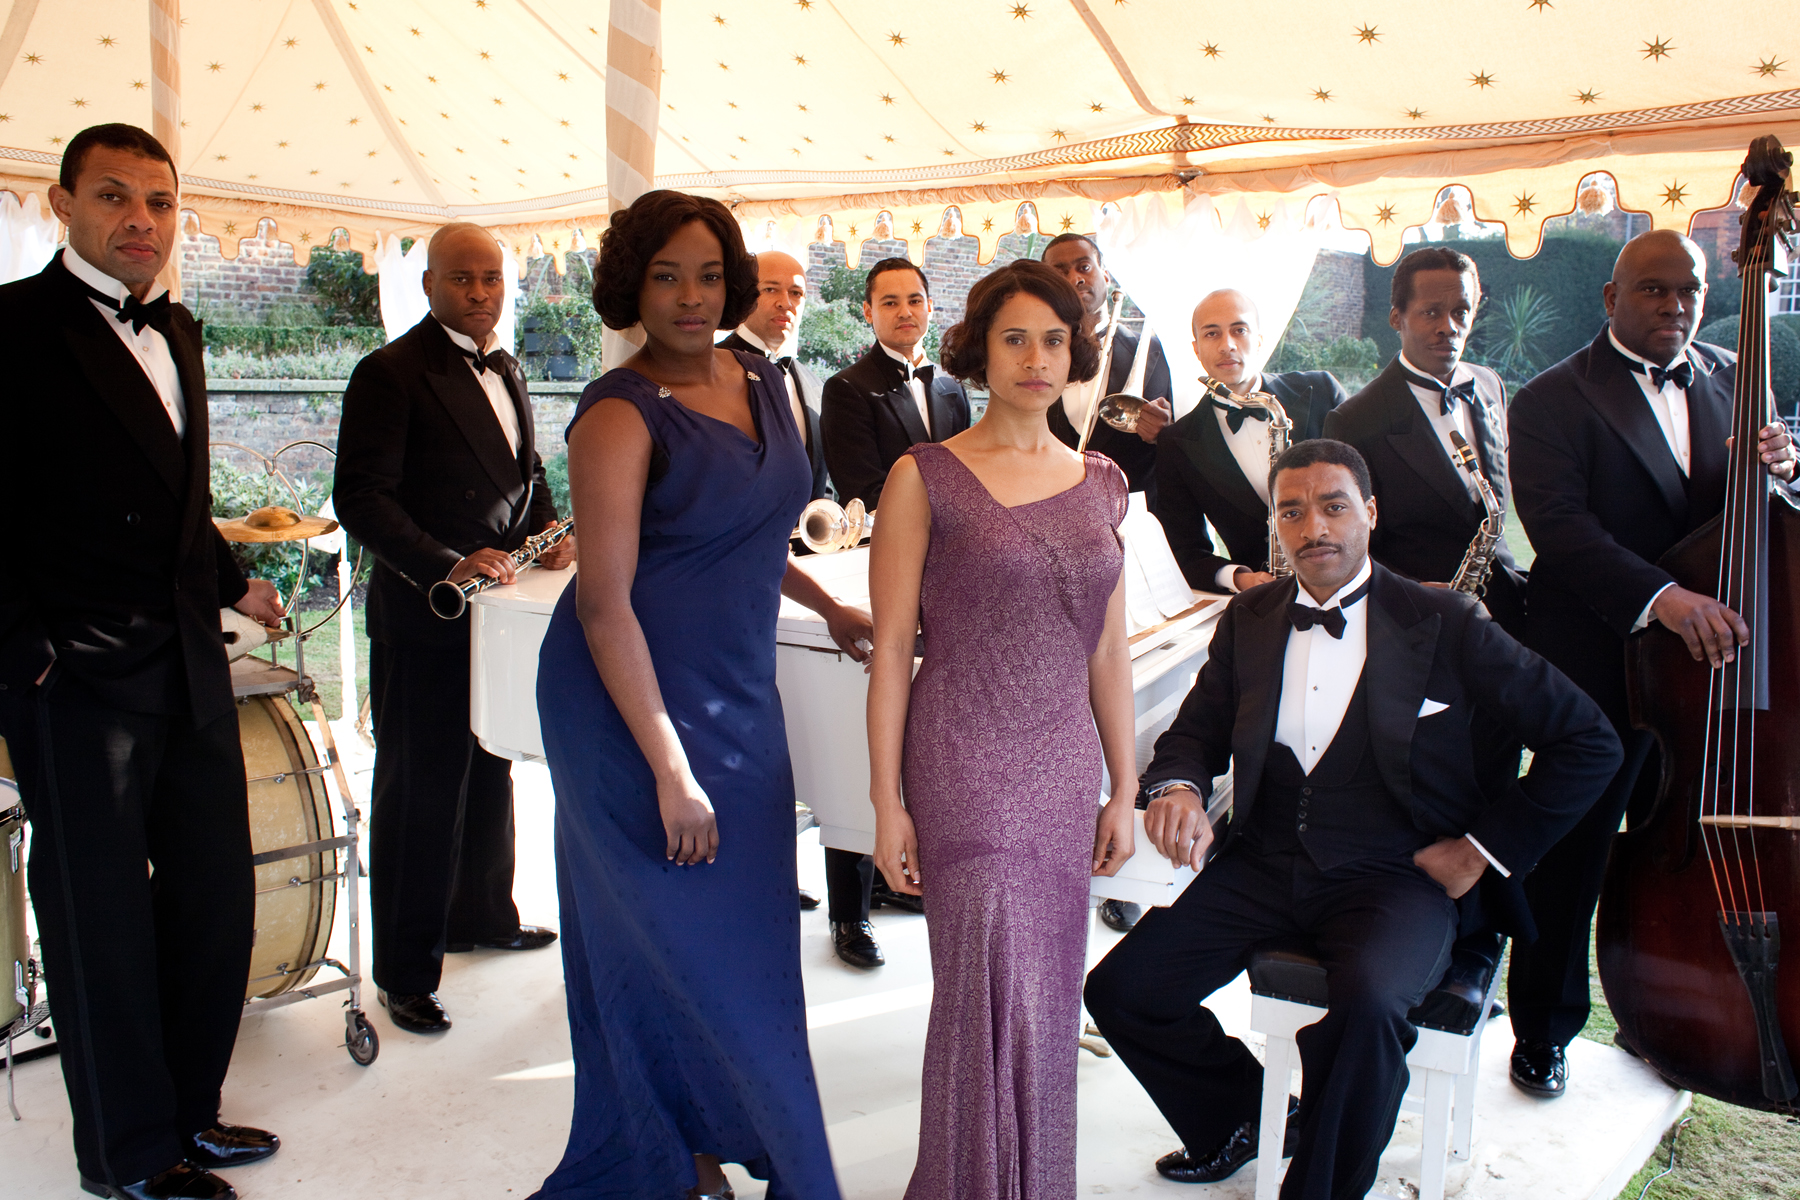 Band members with Carla (Wunmi Mosaku), Jessie (Angel Coulby) and Louis Lester (Chiwetel Ejiofor)